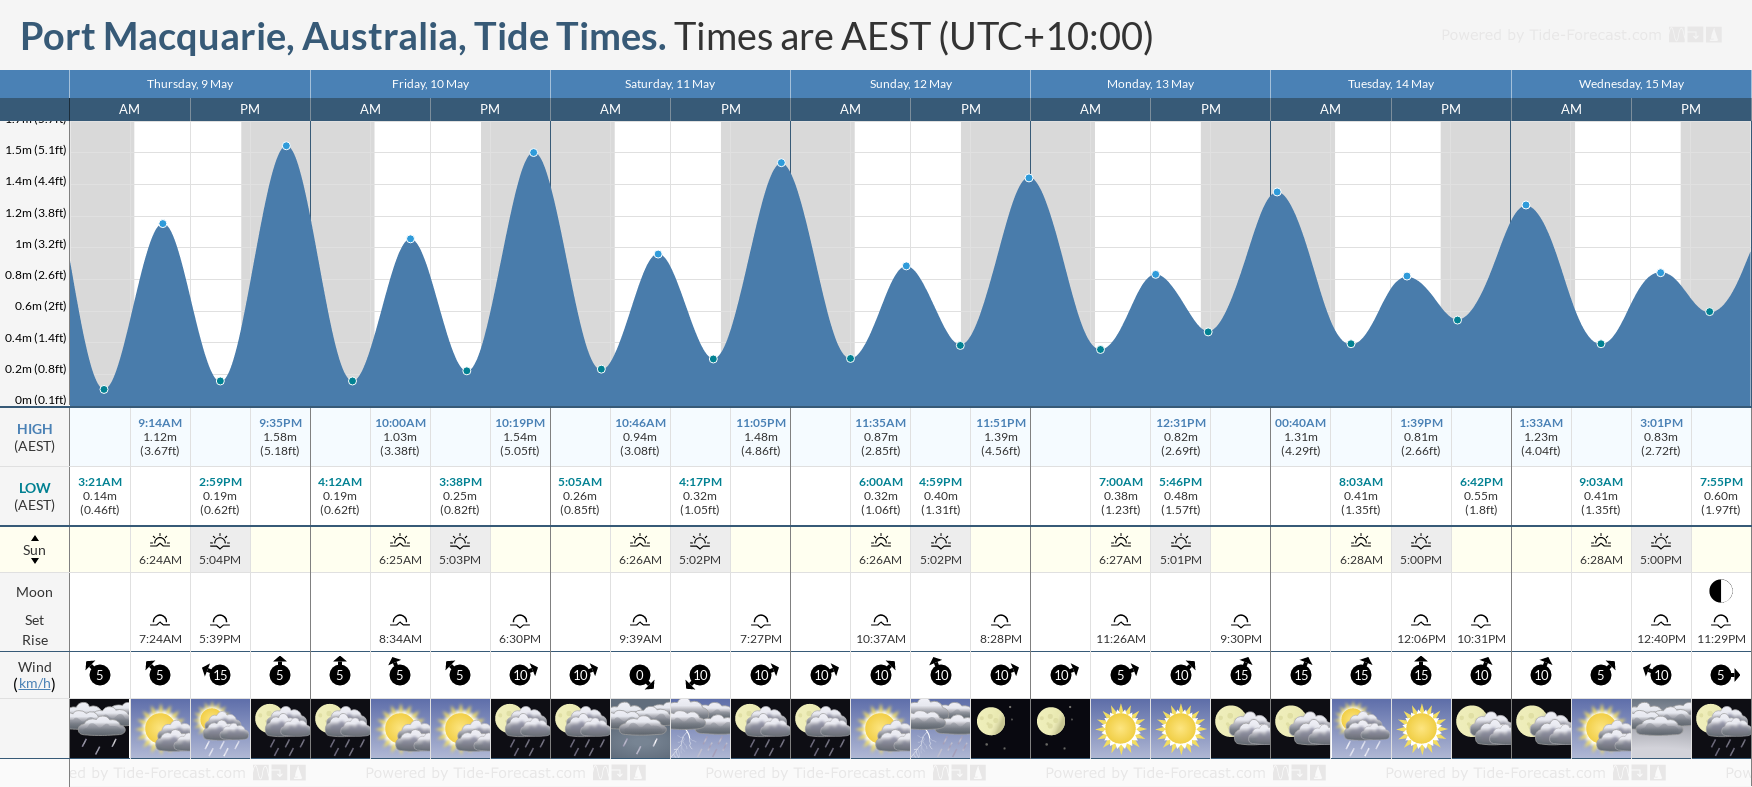 Port Macquarie, Australia Tide Chart including high and low tide times for the next 7 days